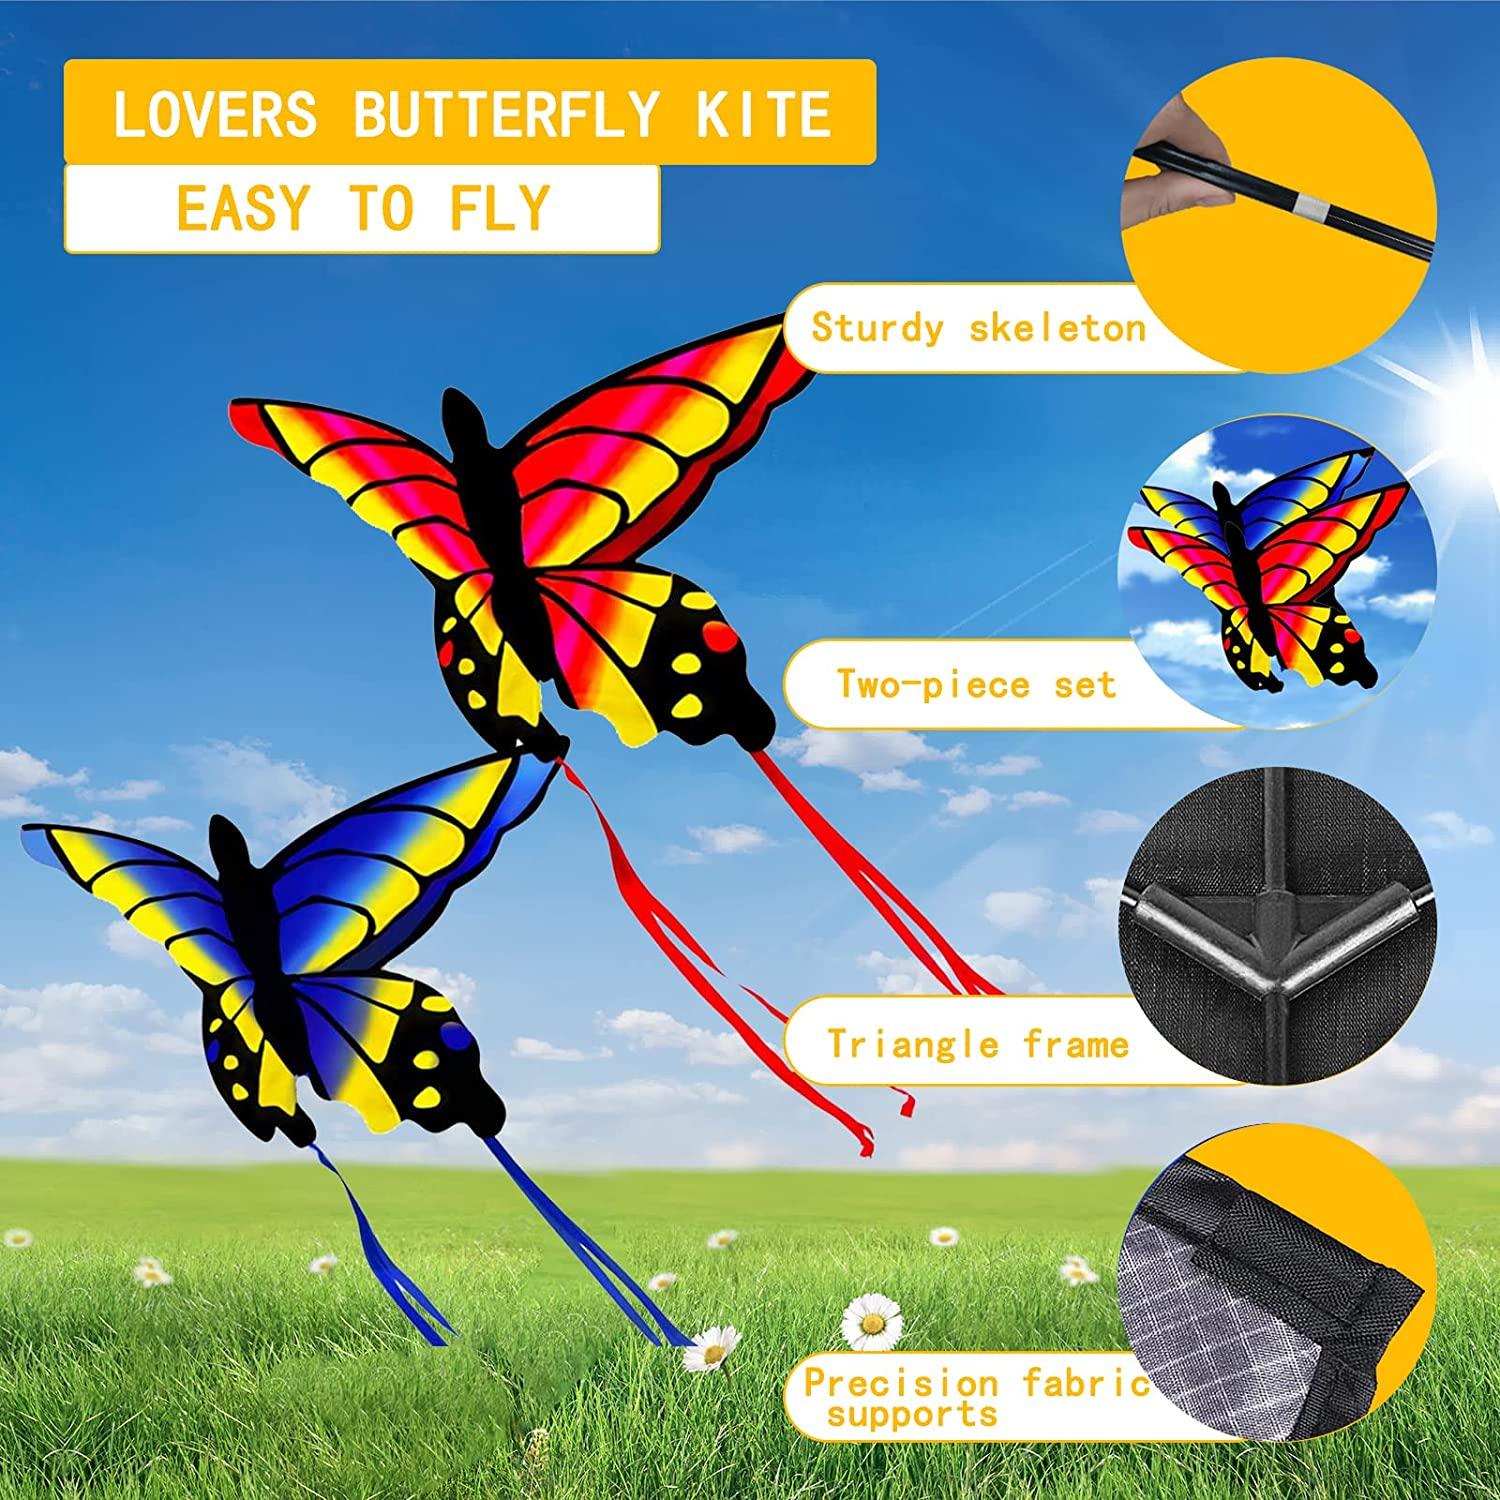 HENGDA KITE for Kids and Adults Amazing Colorful Butterfly Kite